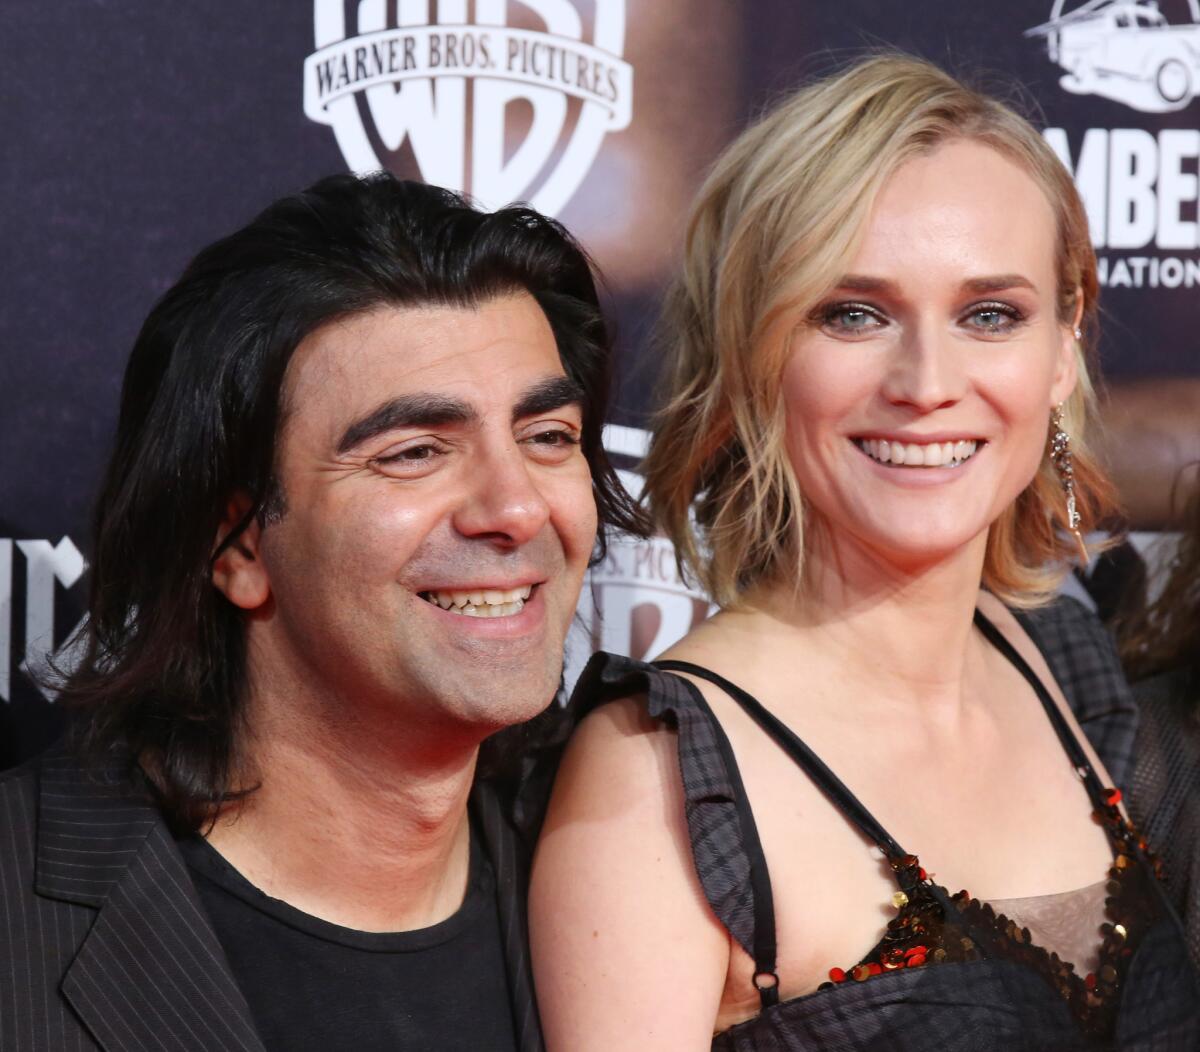 Director Fatih Akin and actress Diane Kruger at the "In the Fade" premiere in Hamburg, Germany, last month.